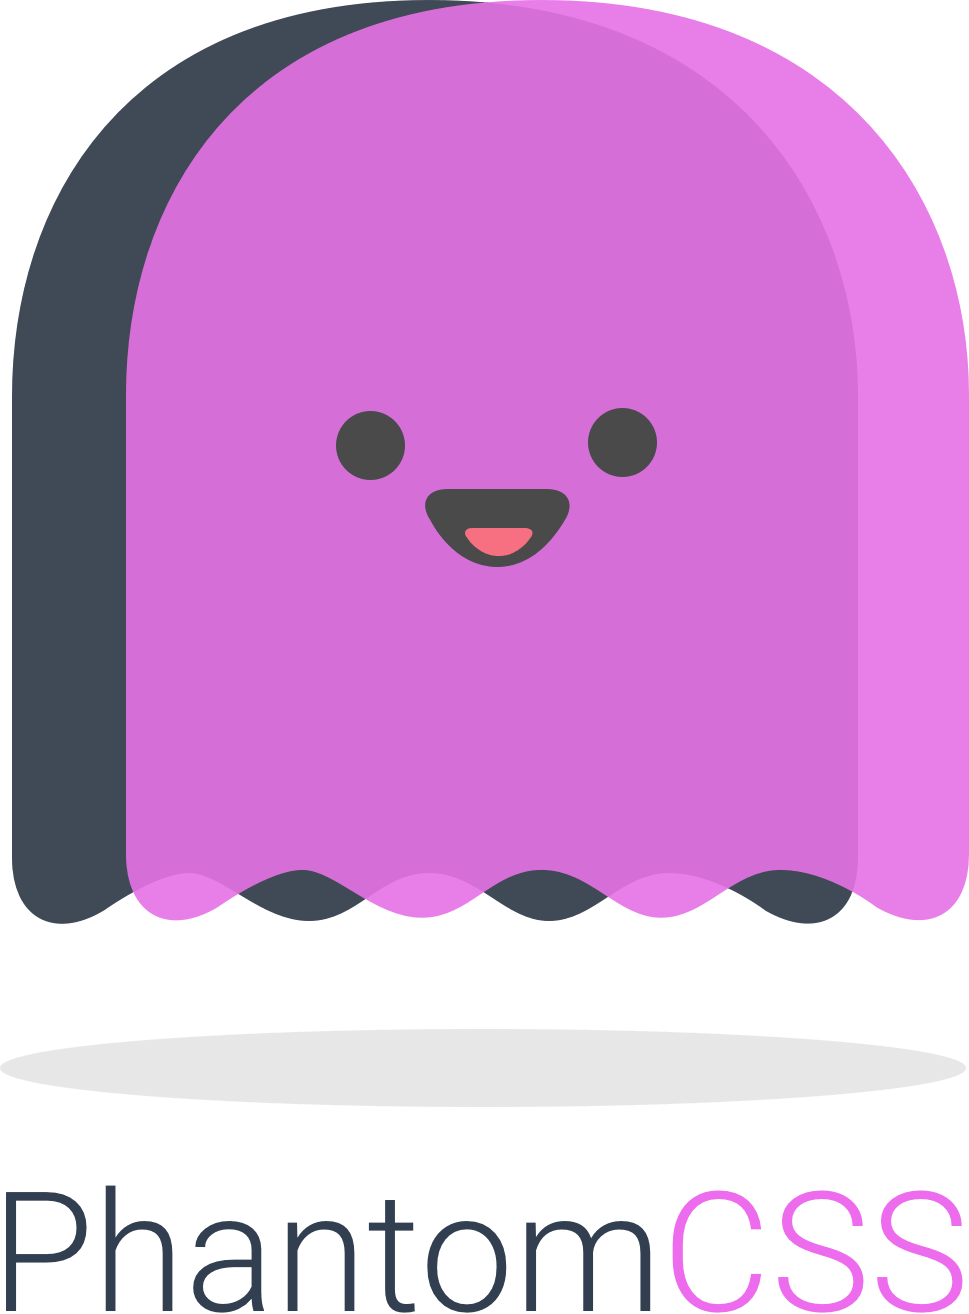 Cute image of a ghost